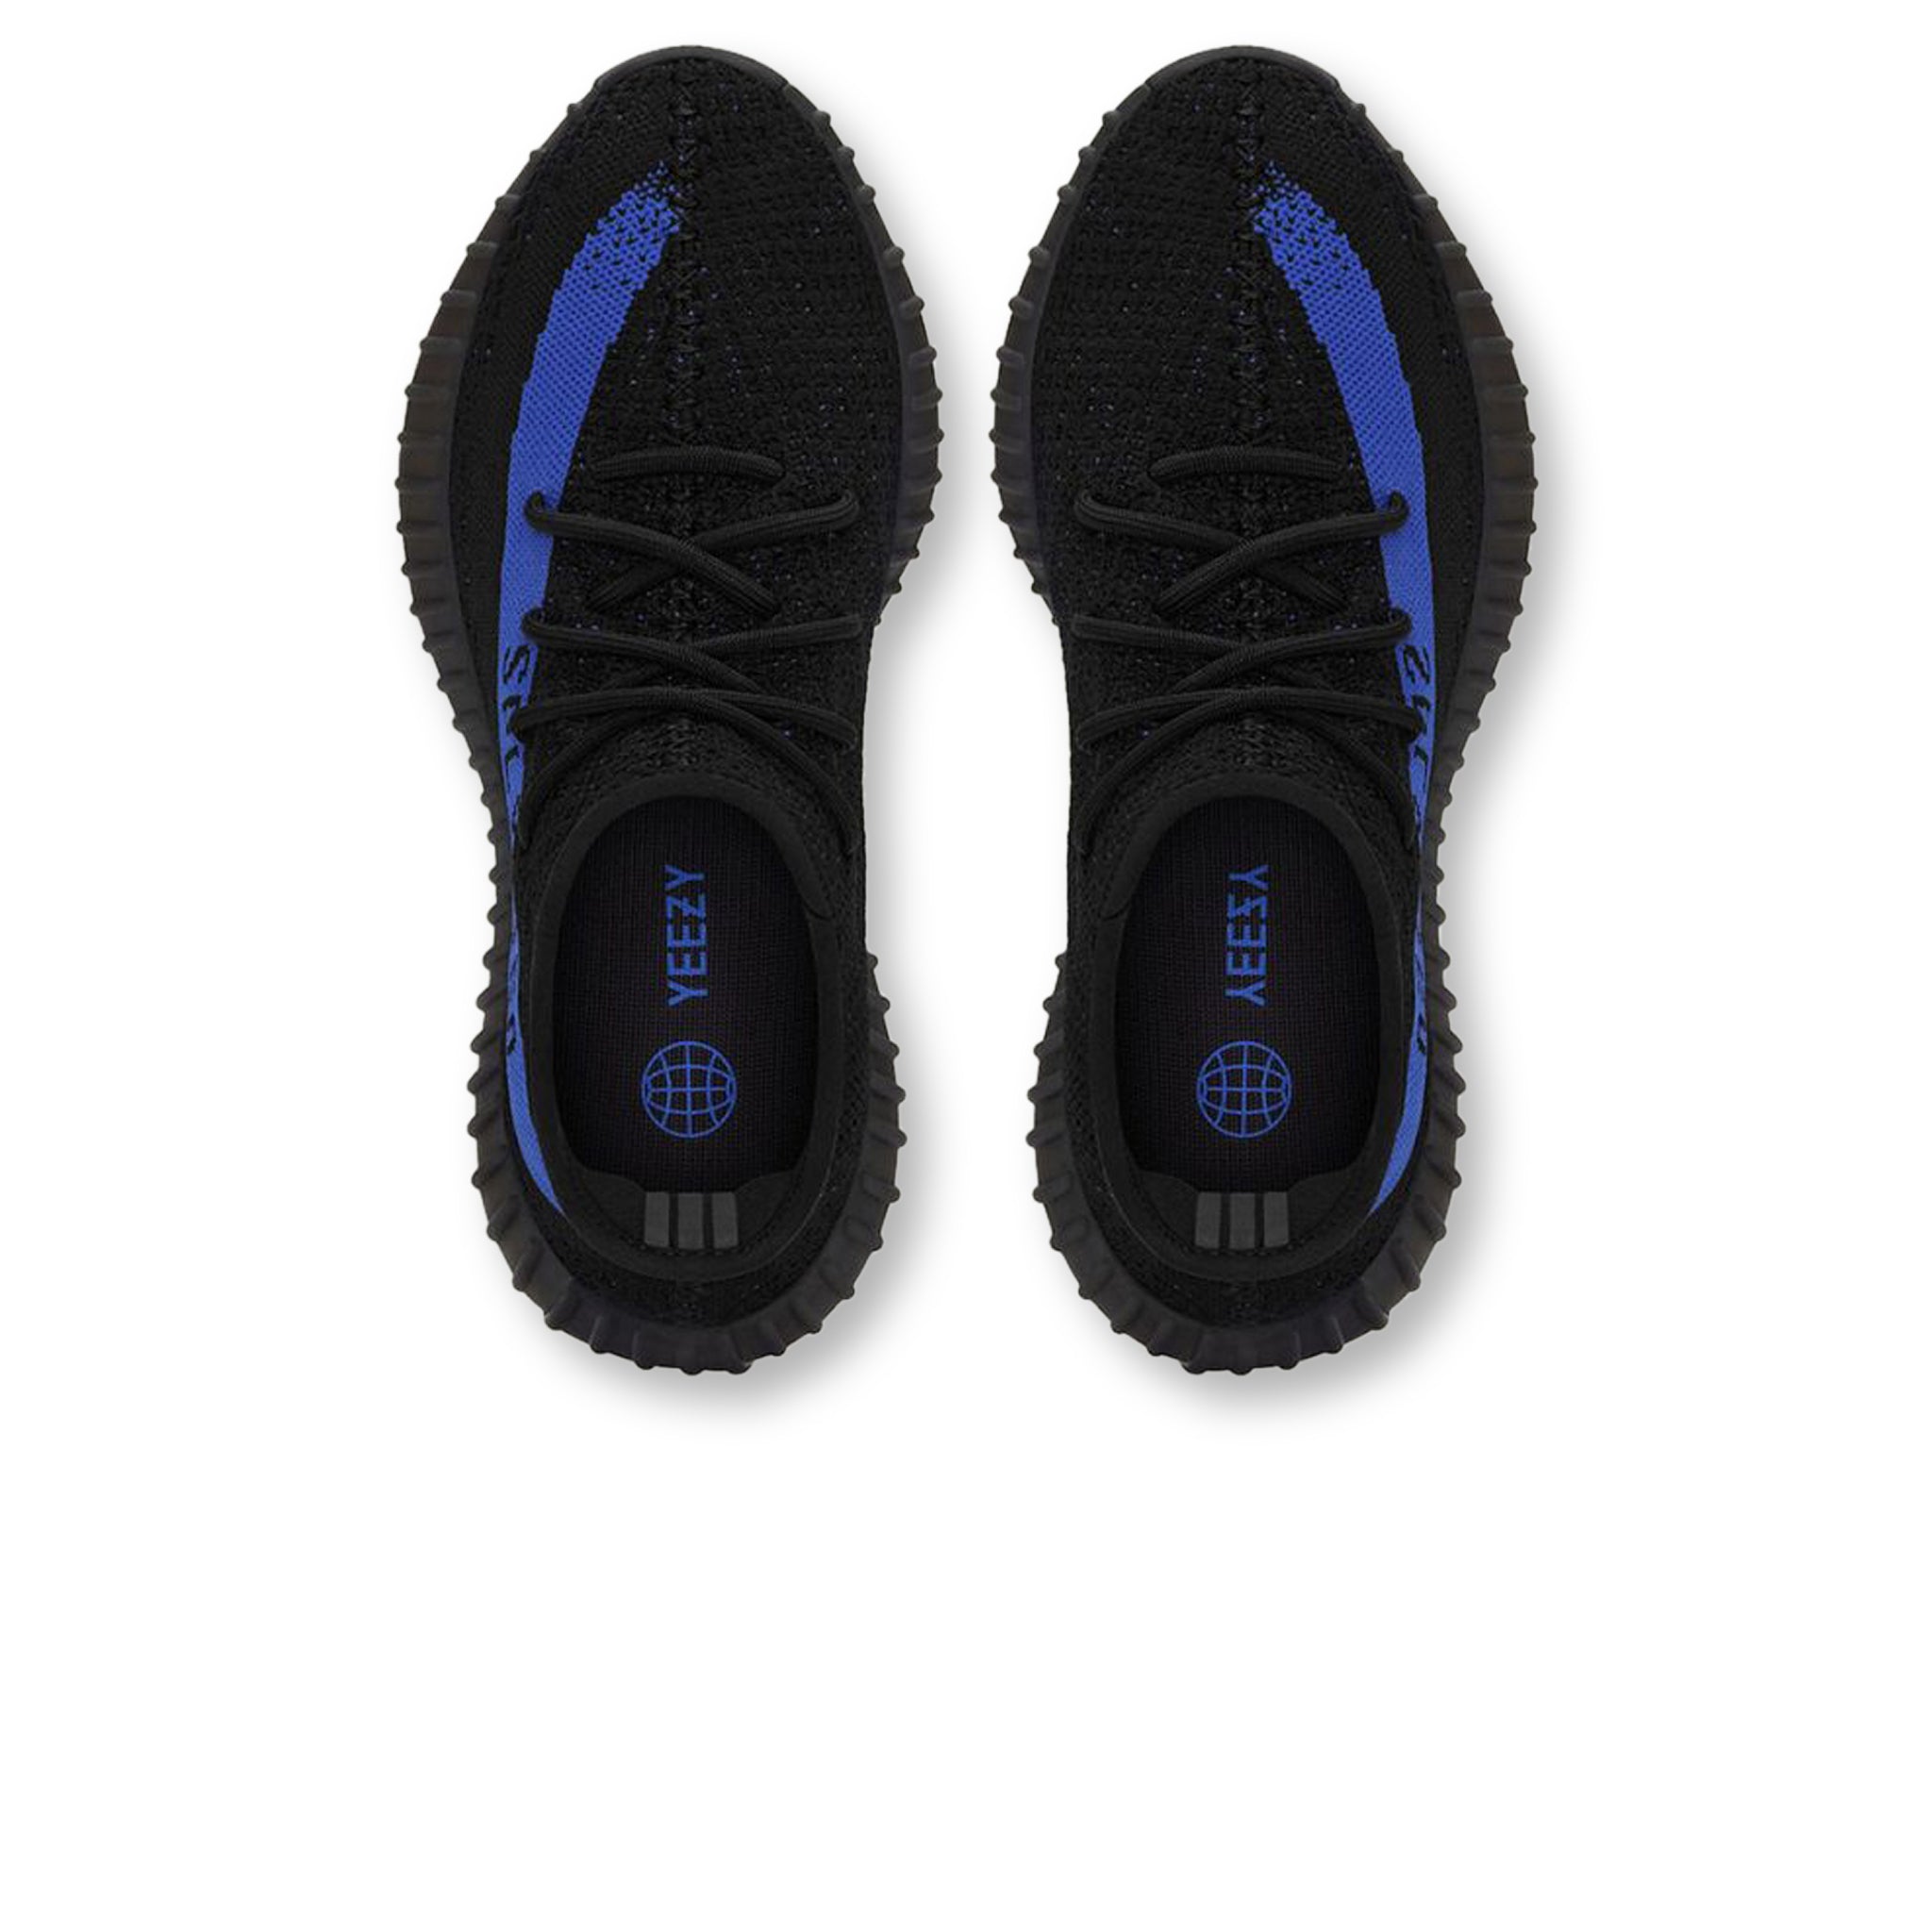 Top down view of Adidas Yeezy Boost 350 V2 Dazzling Blue GY7164